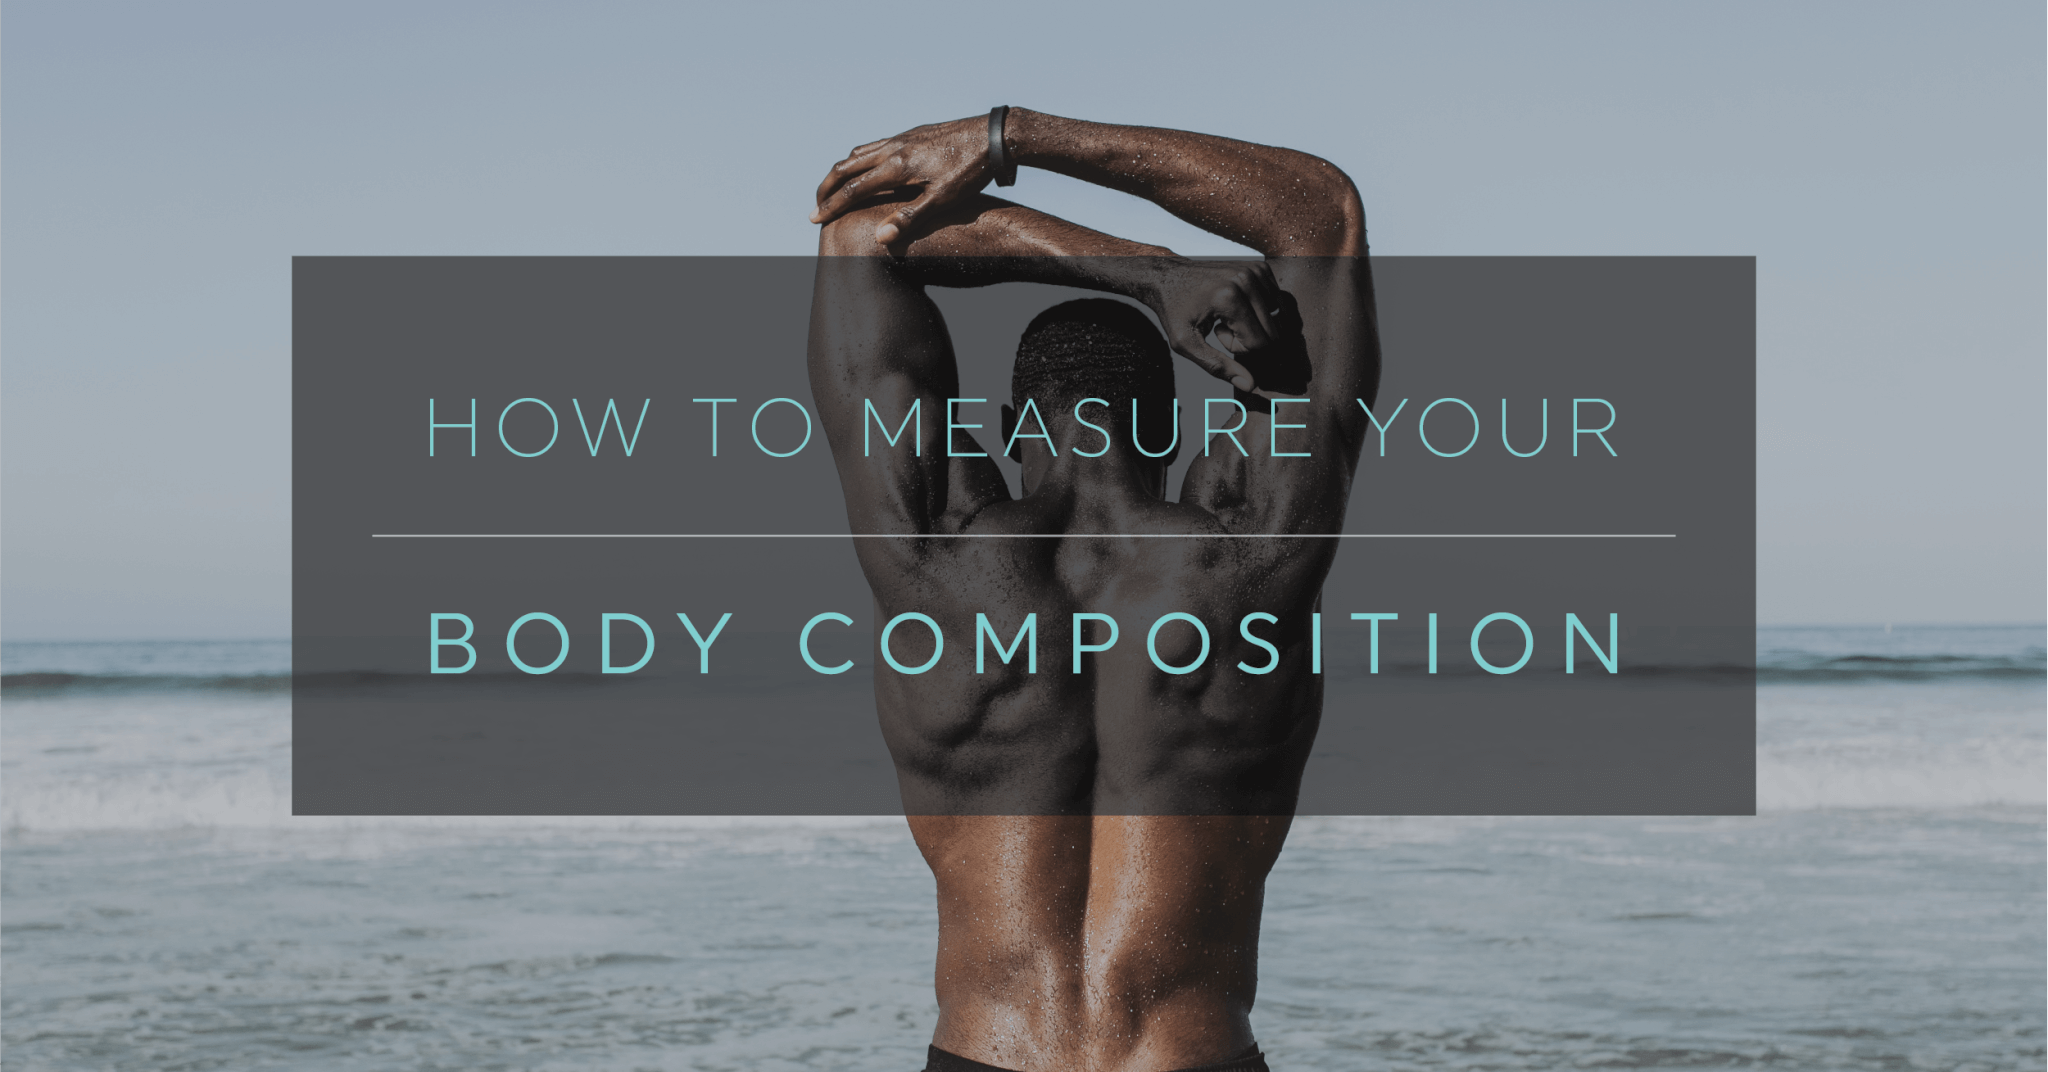 https://cdn.shpe.us/wp-content/uploads/sites/5/2018/12/guide-to-body-composition-01.png